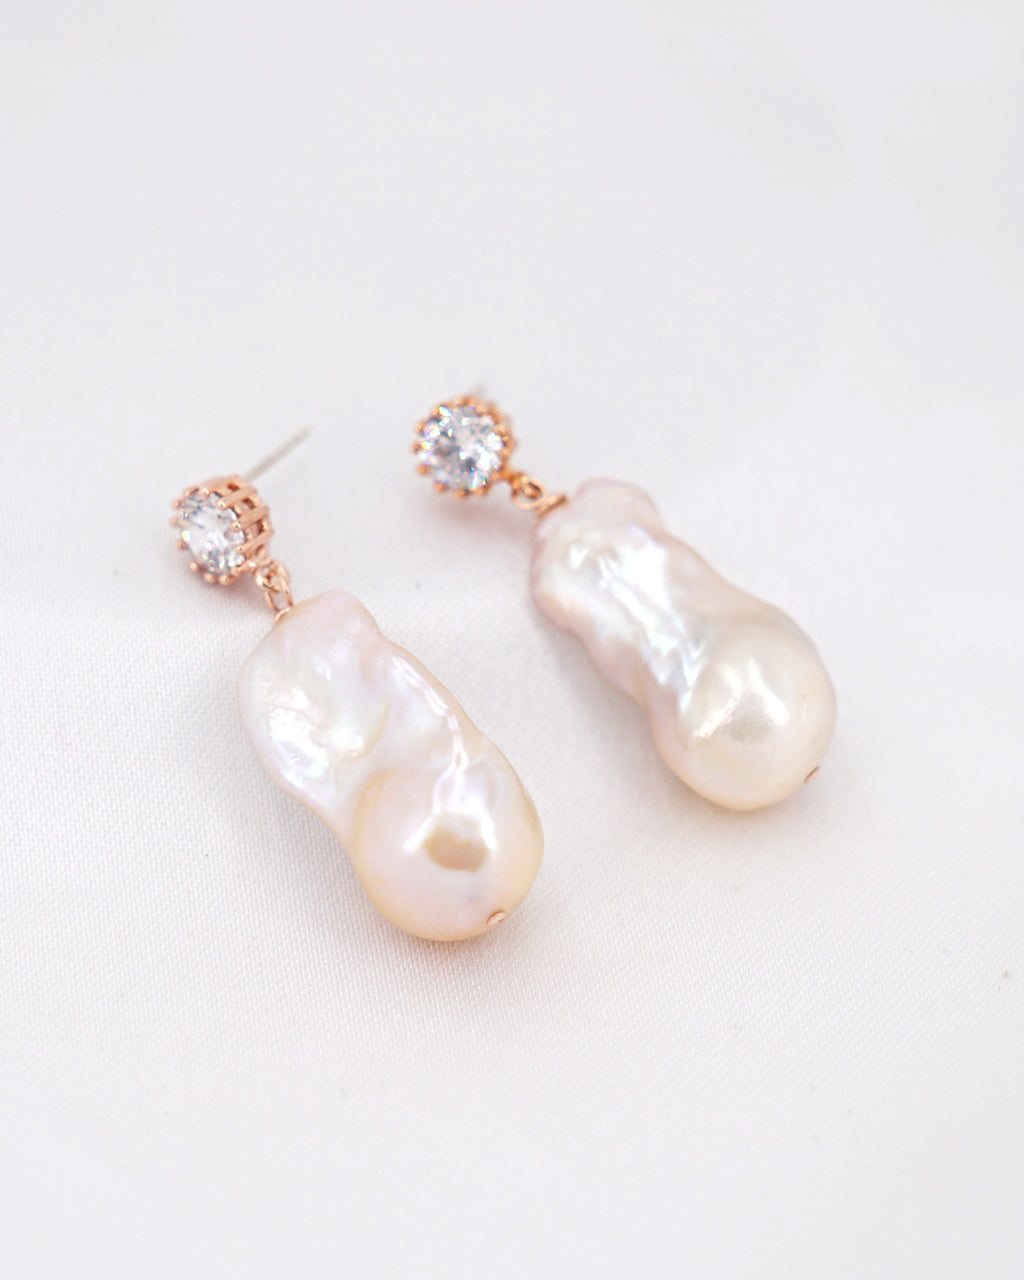 Pink Baroque Pearl Earrings - Round Sparkle - Wedding Bridal Jewelry for Brides and Bridesmaids | Singapore